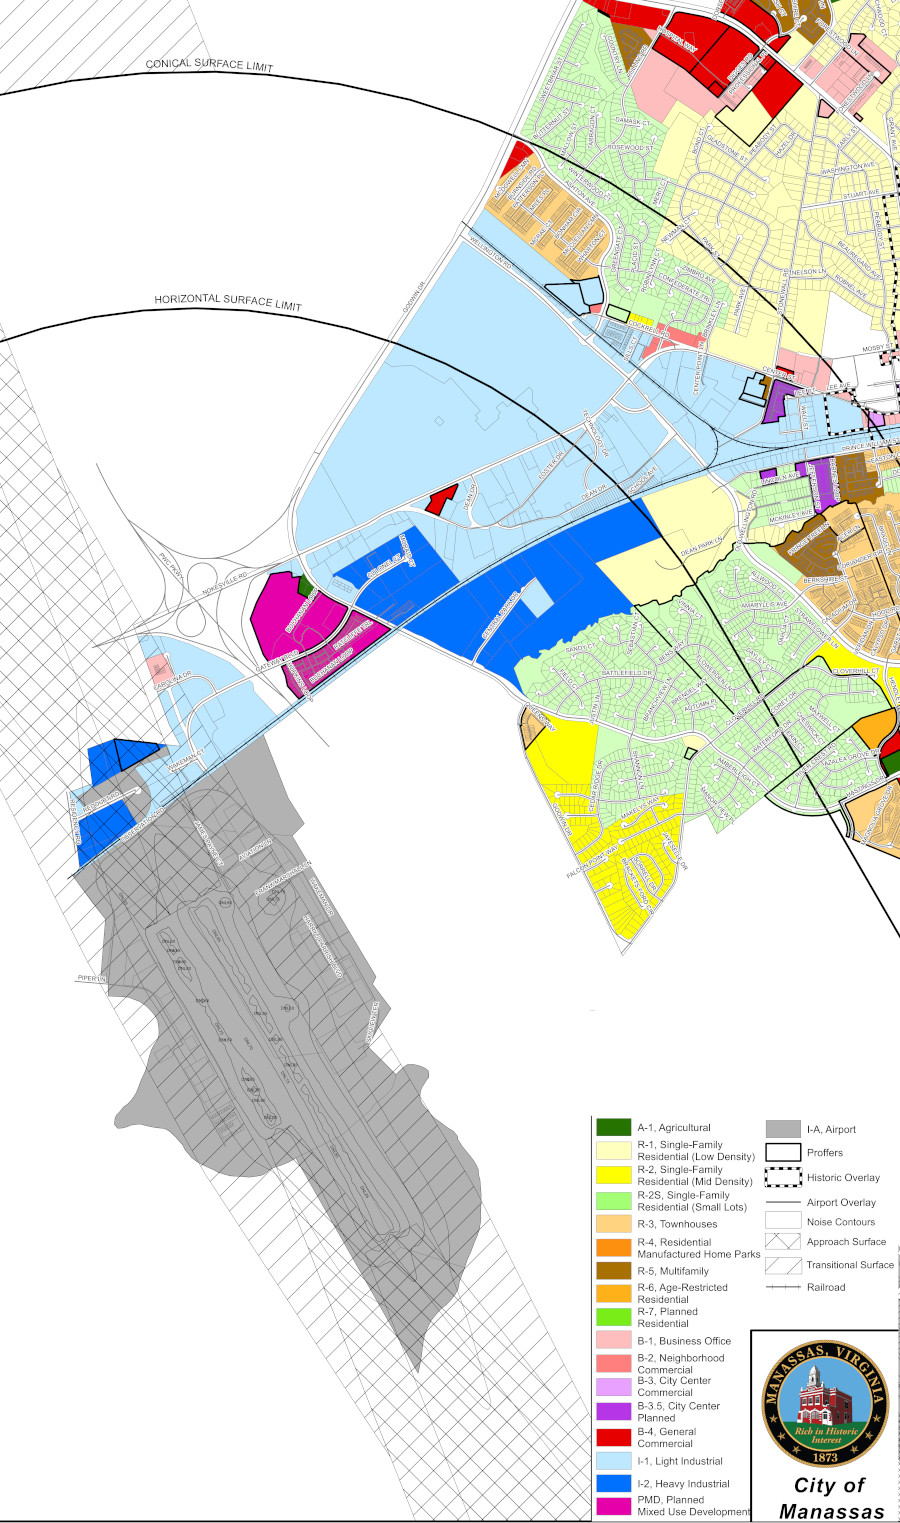 the Airport Impact Overlay District in Manassas impacts minimal private property within the city; noise is an issue primarily in Prince William County